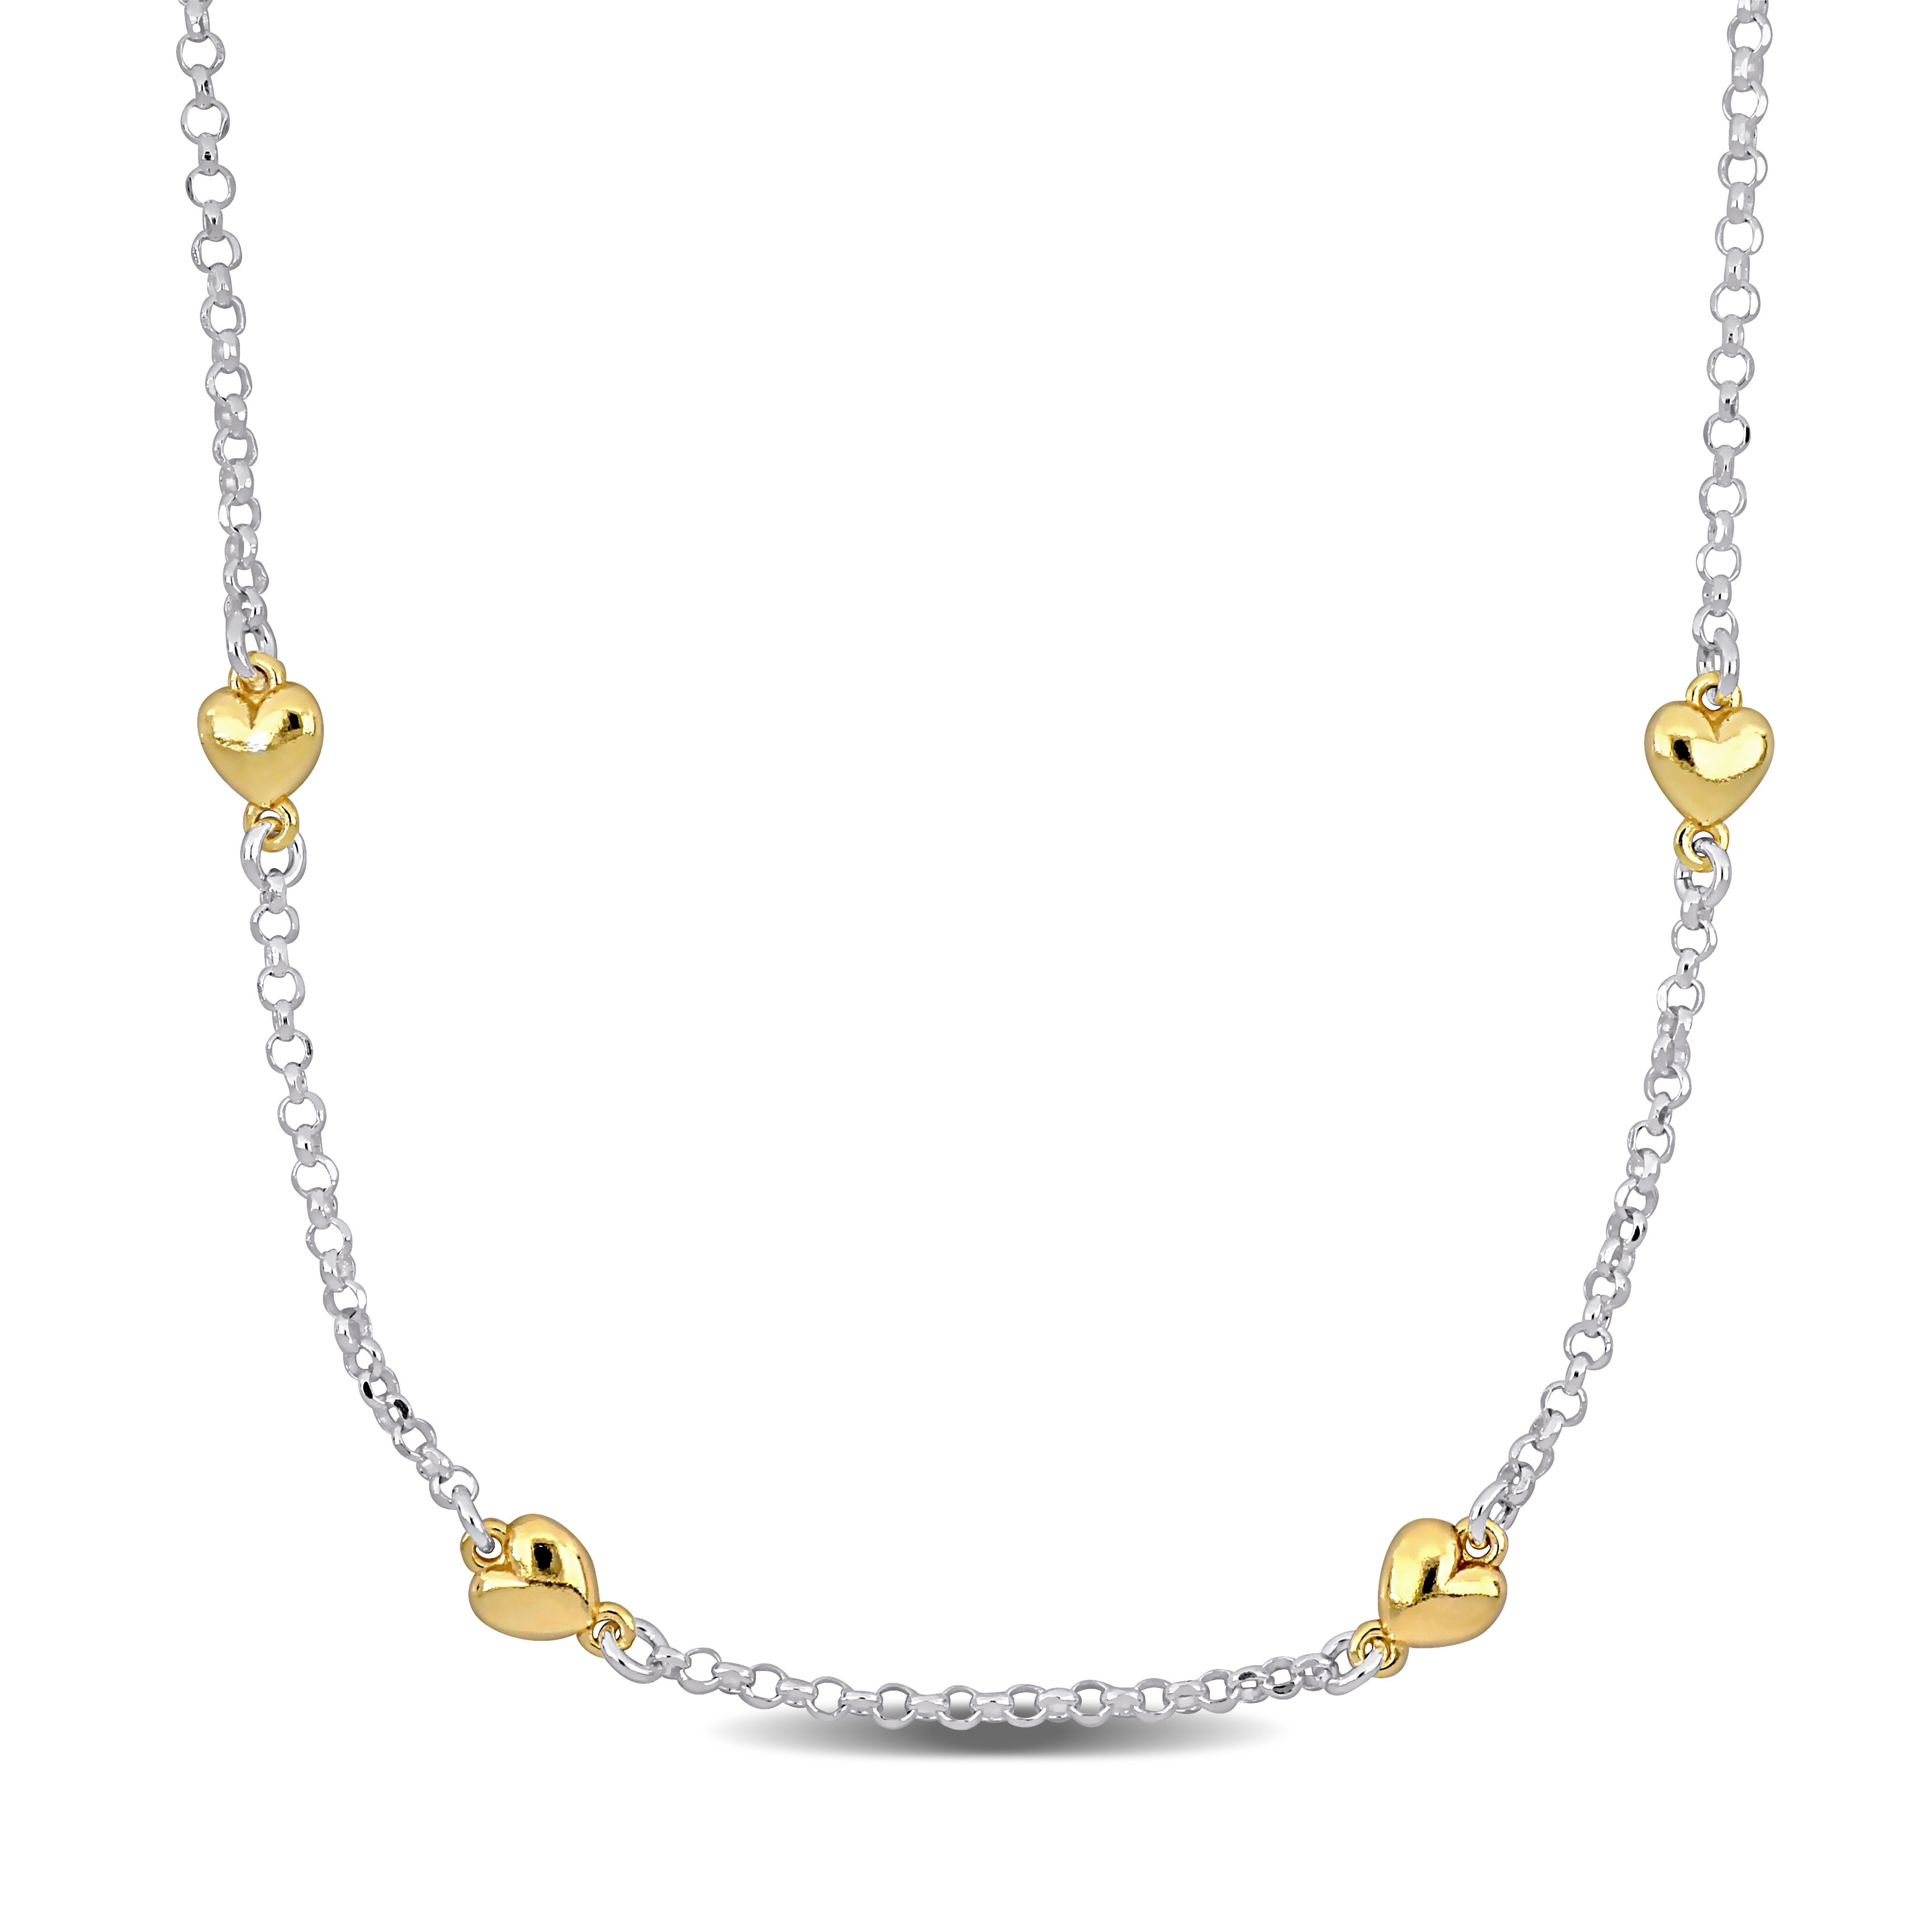 Four Heart Charm Station Necklace in Two-Tone Yellow and White Sterling Silver - 16.5 in.